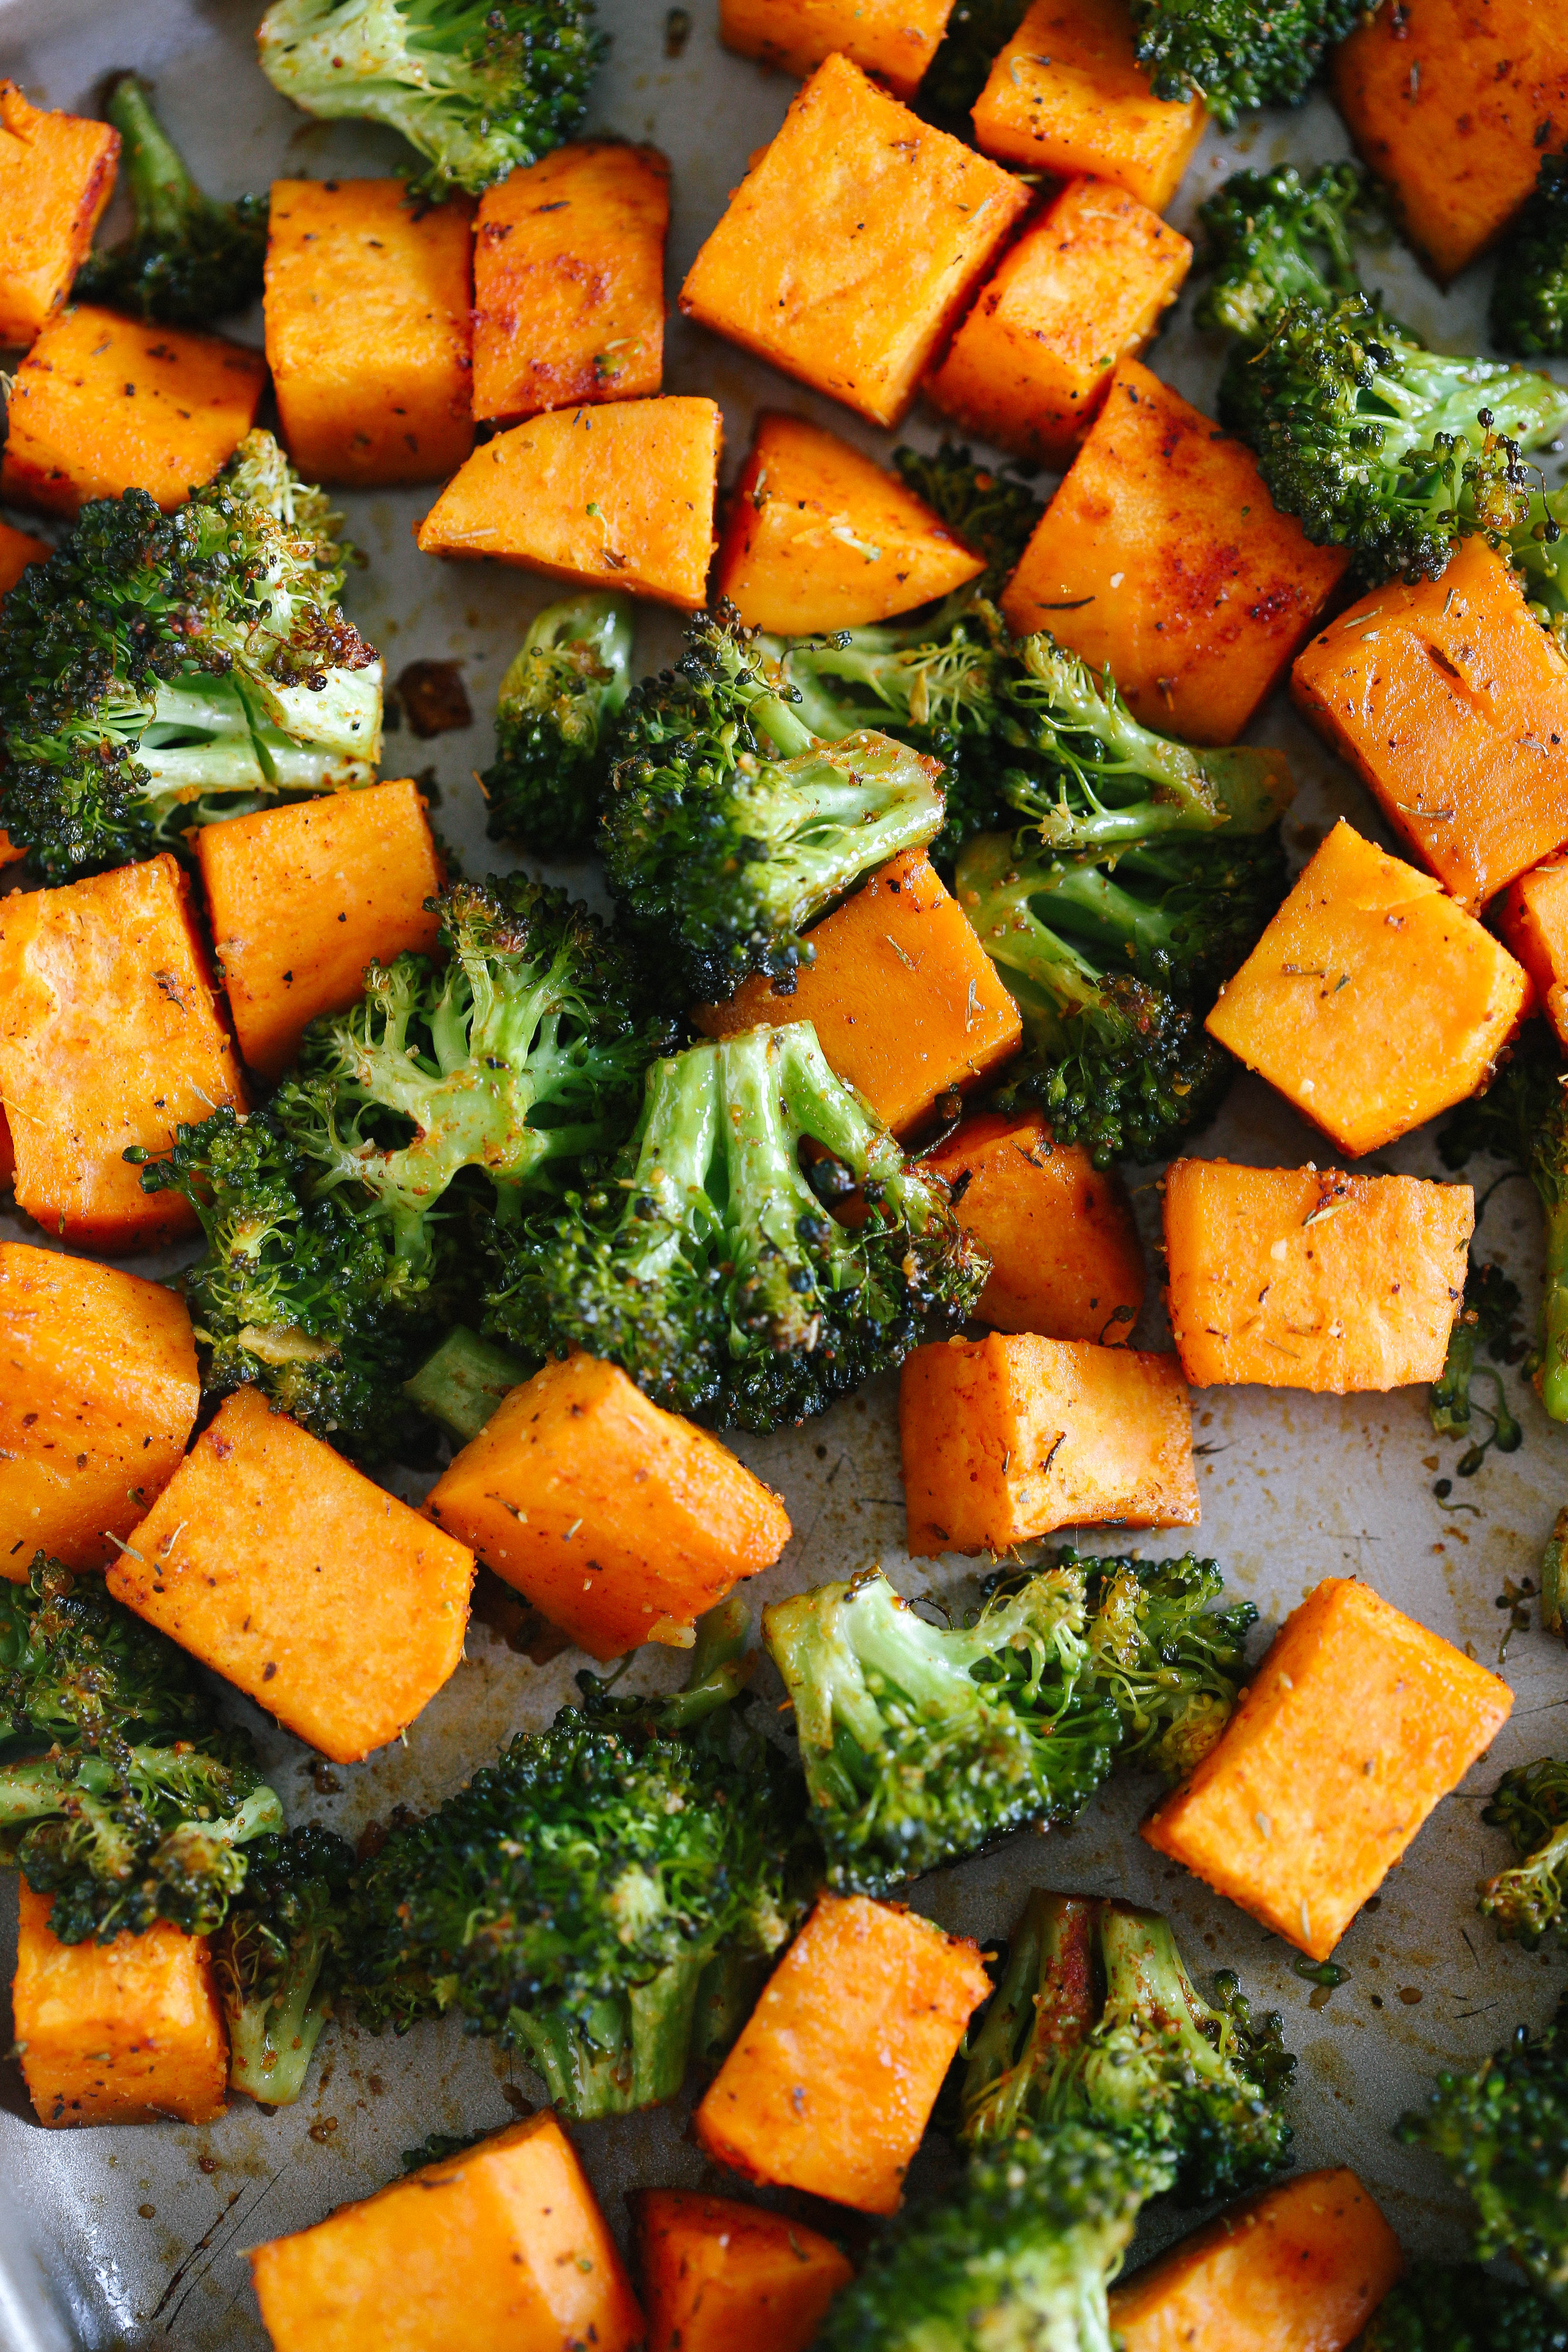 These Perfectly Roasted Broccoli and Sweet Potatoes make a delicious healthy side dish and are seasoned to perfection!